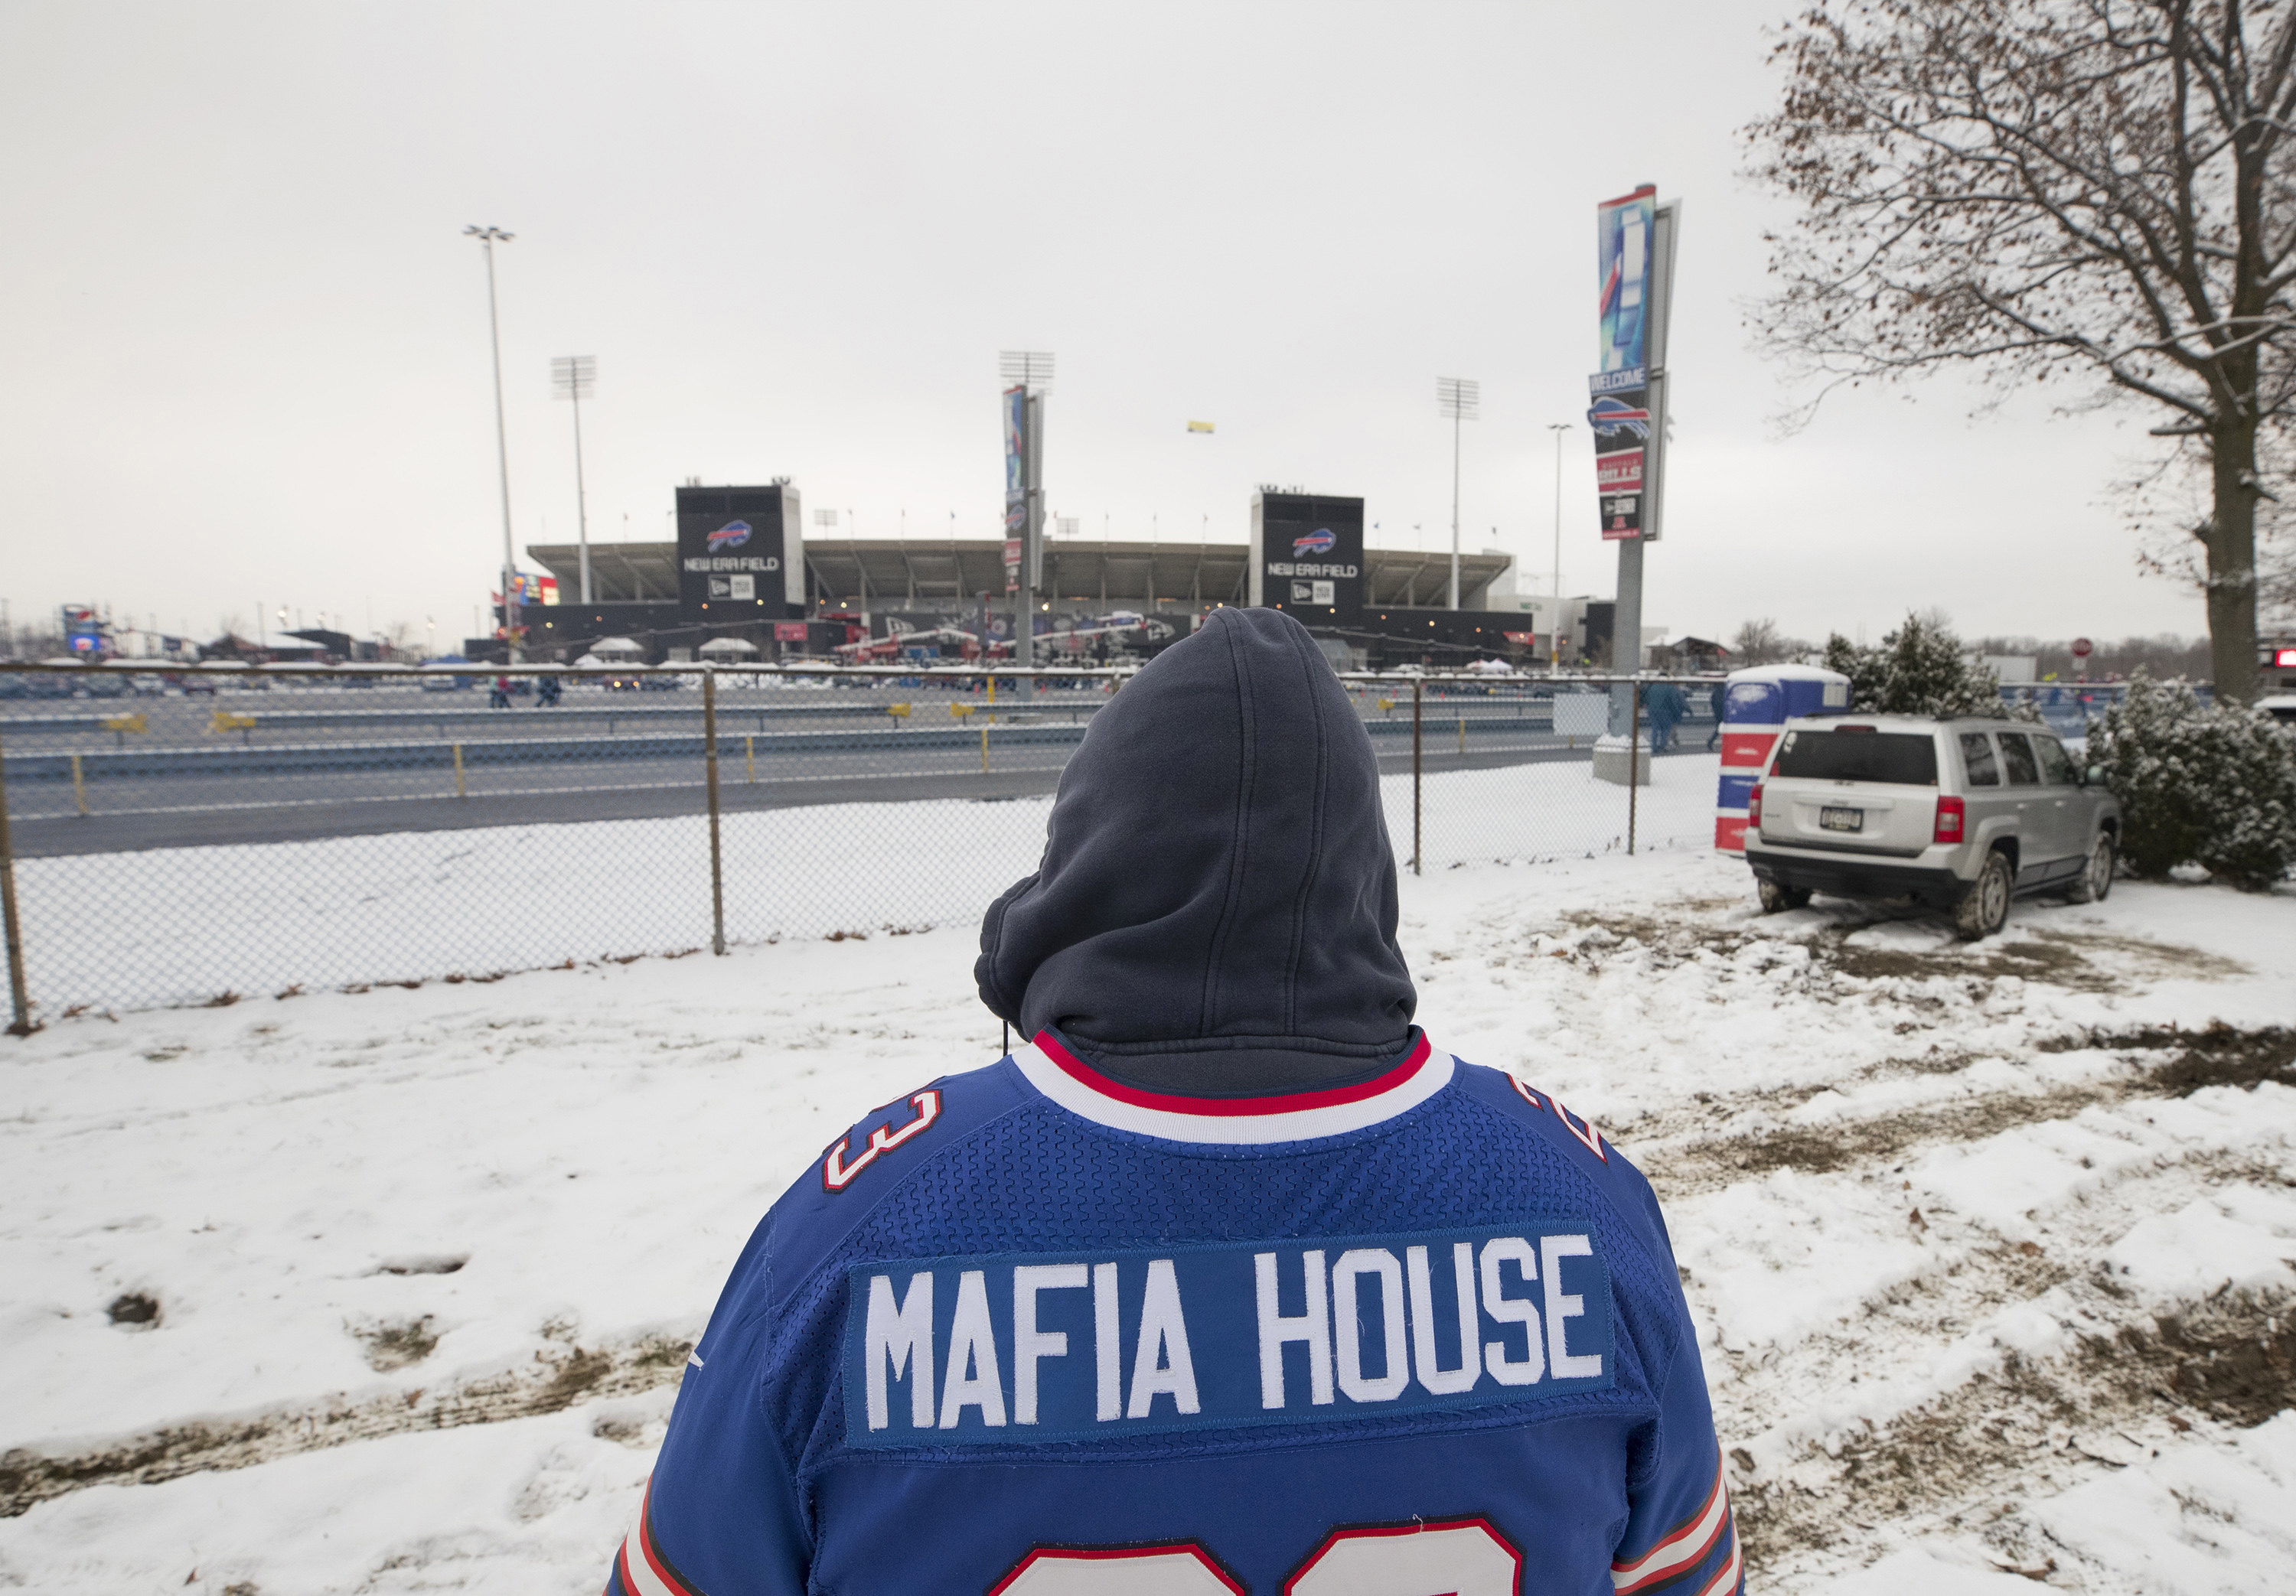 The Buffalo Bills are playing their first home playoff game in 24 years.